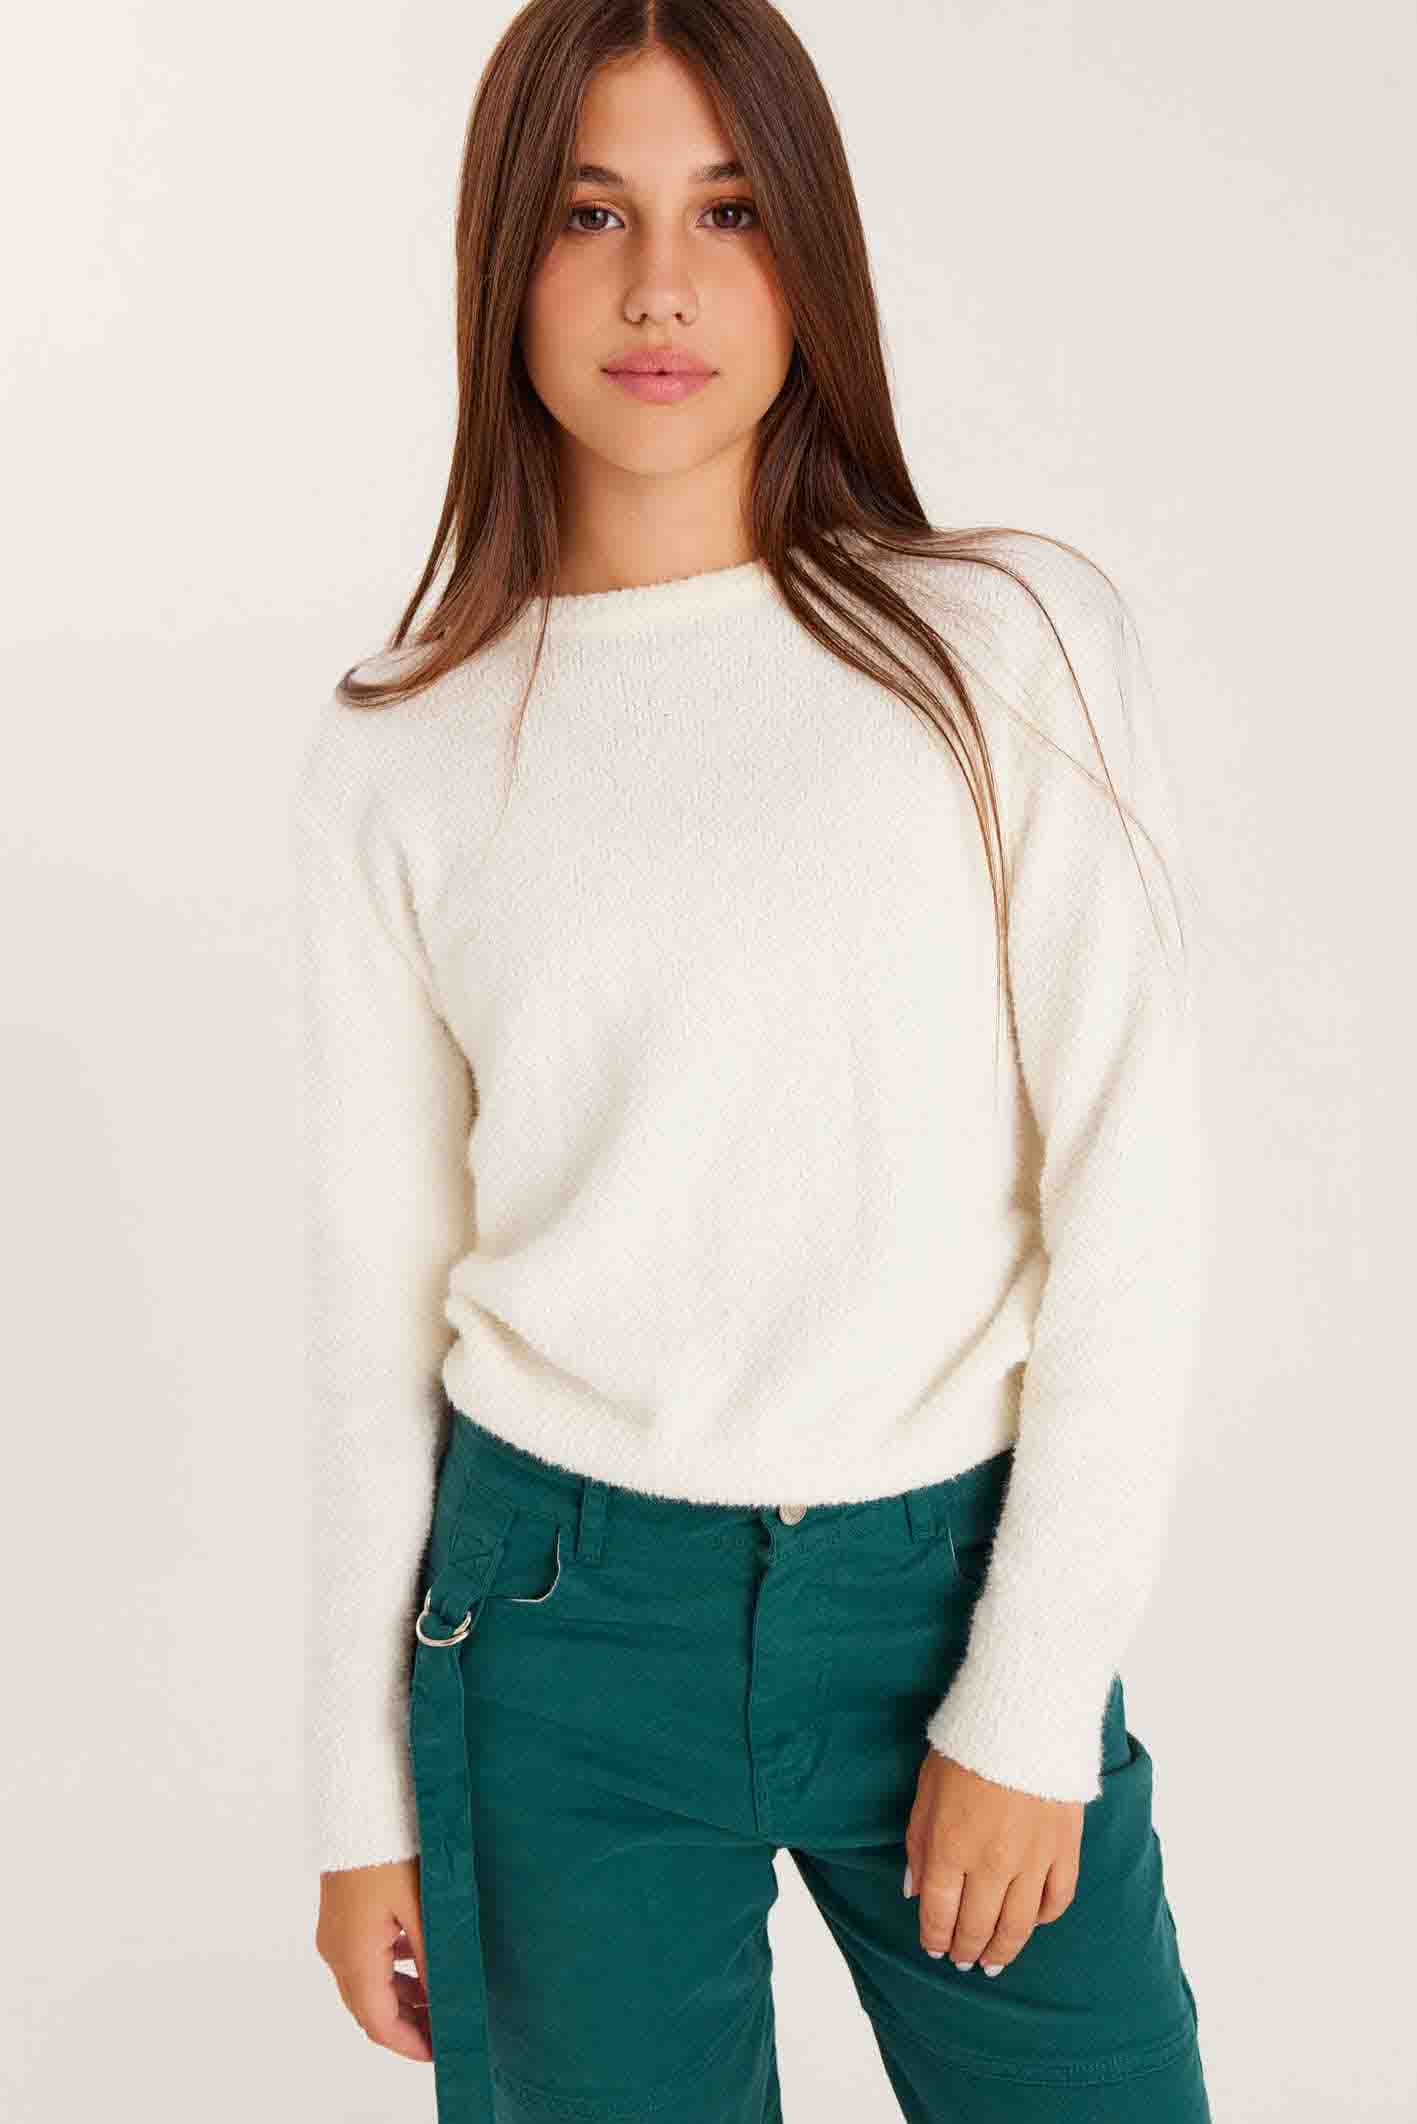 comoquieres_sweater-softly-xs_32-16-2024__picture-45528